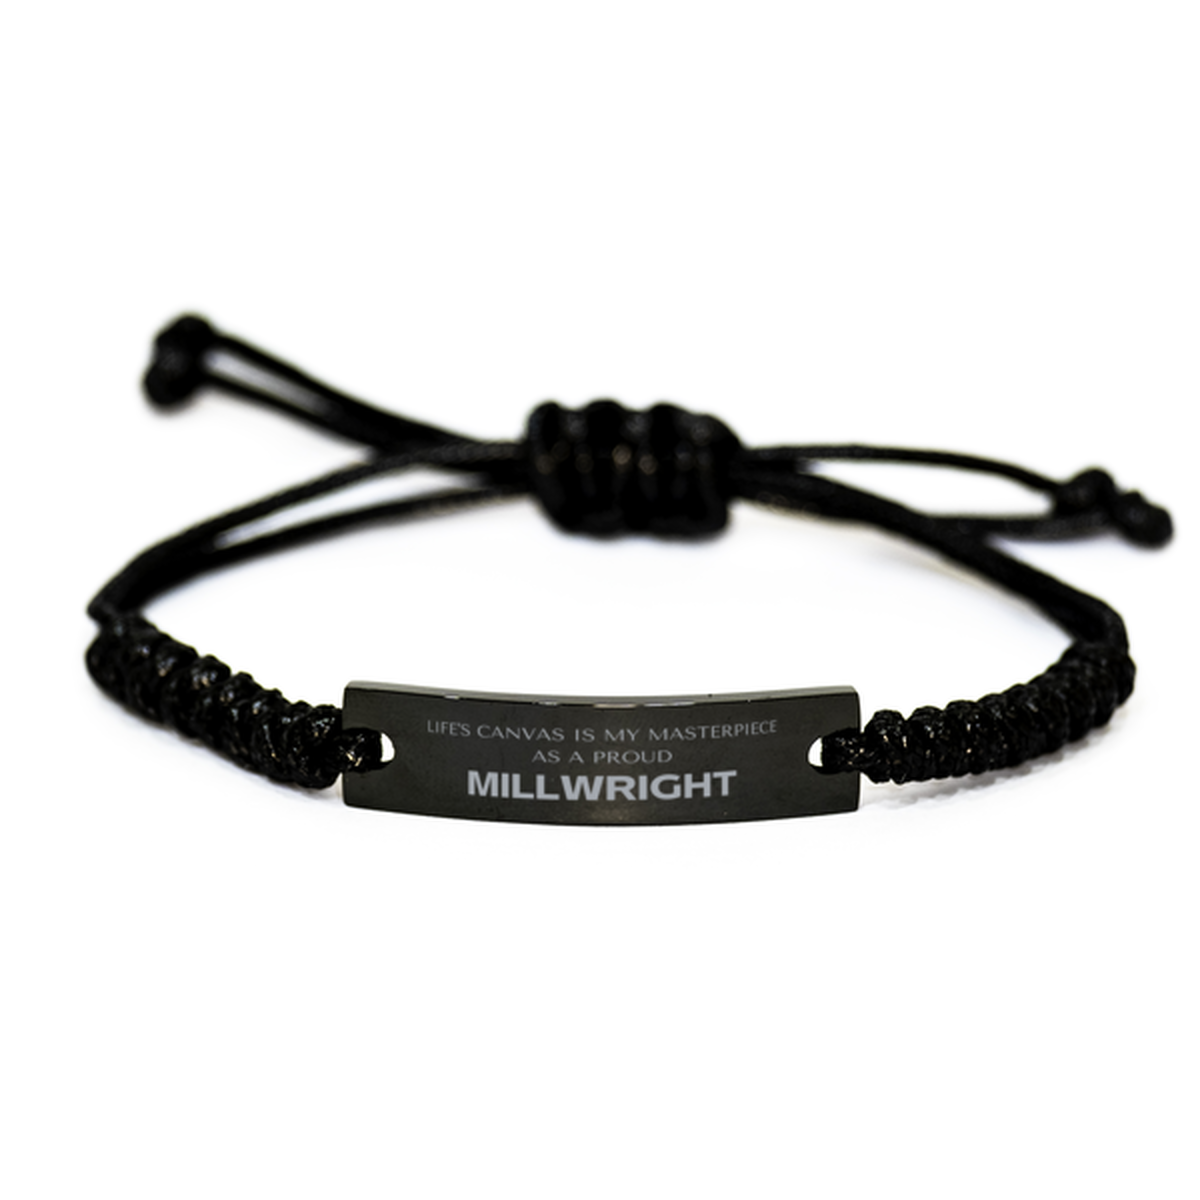 Proud Millwright Gifts, Life's canvas is my masterpiece, Epic Birthday Christmas Unique Black Rope Bracelet For Millwright, Coworkers, Men, Women, Friends